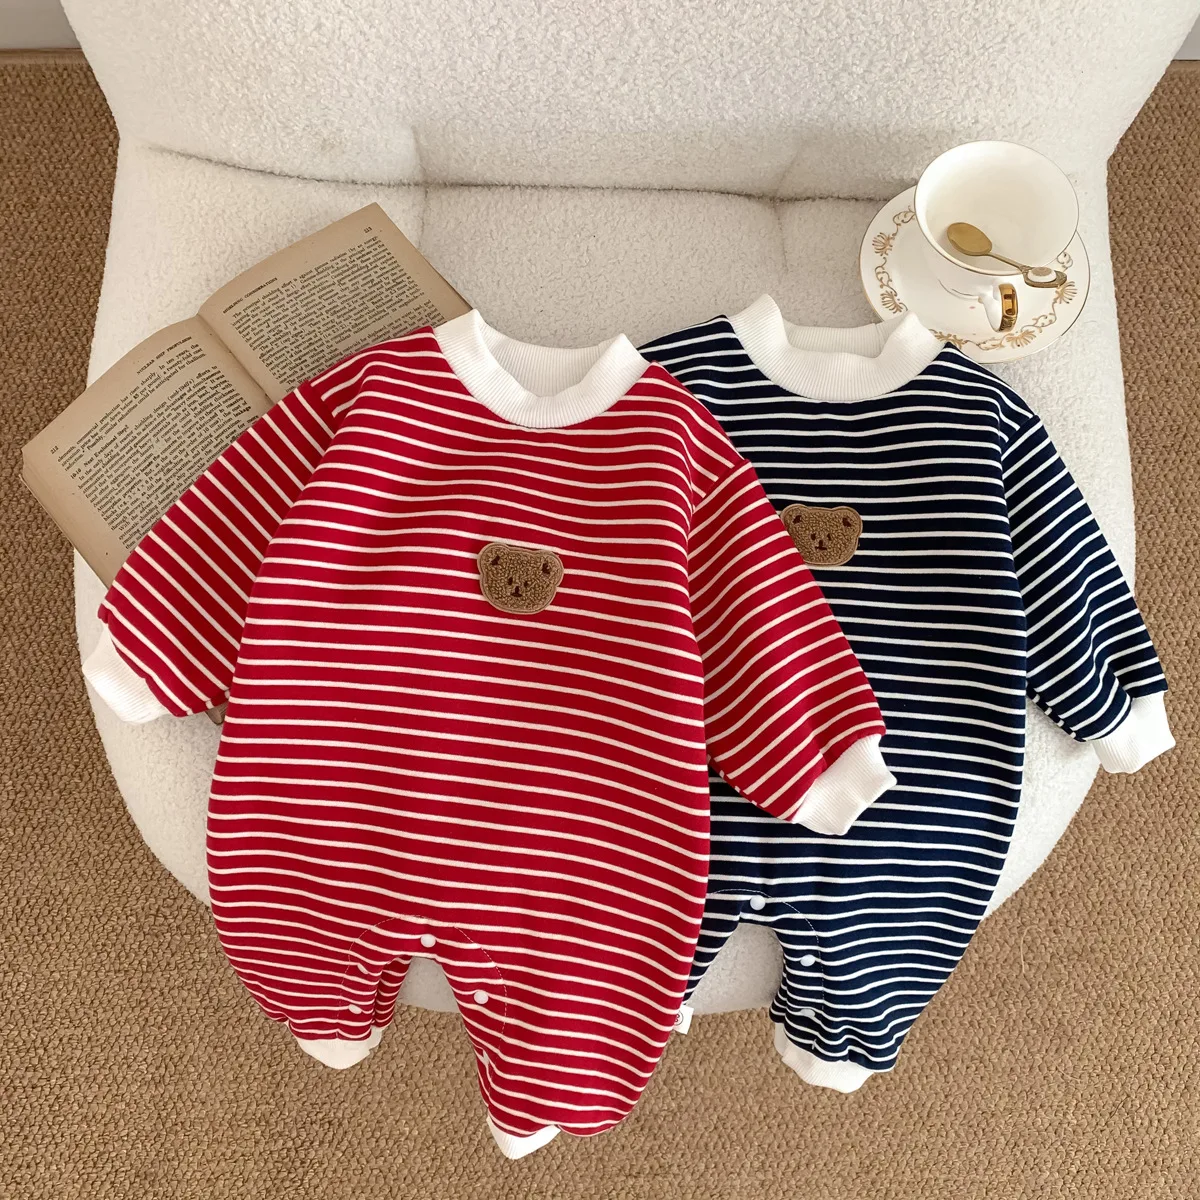 Baby Girl Clothes Spring And Autumn Newborn Bodysuit Long Sleeve Round Neck Red Stripe Jumpsuit 0-2 Year-Old Boys' Baby Clothes